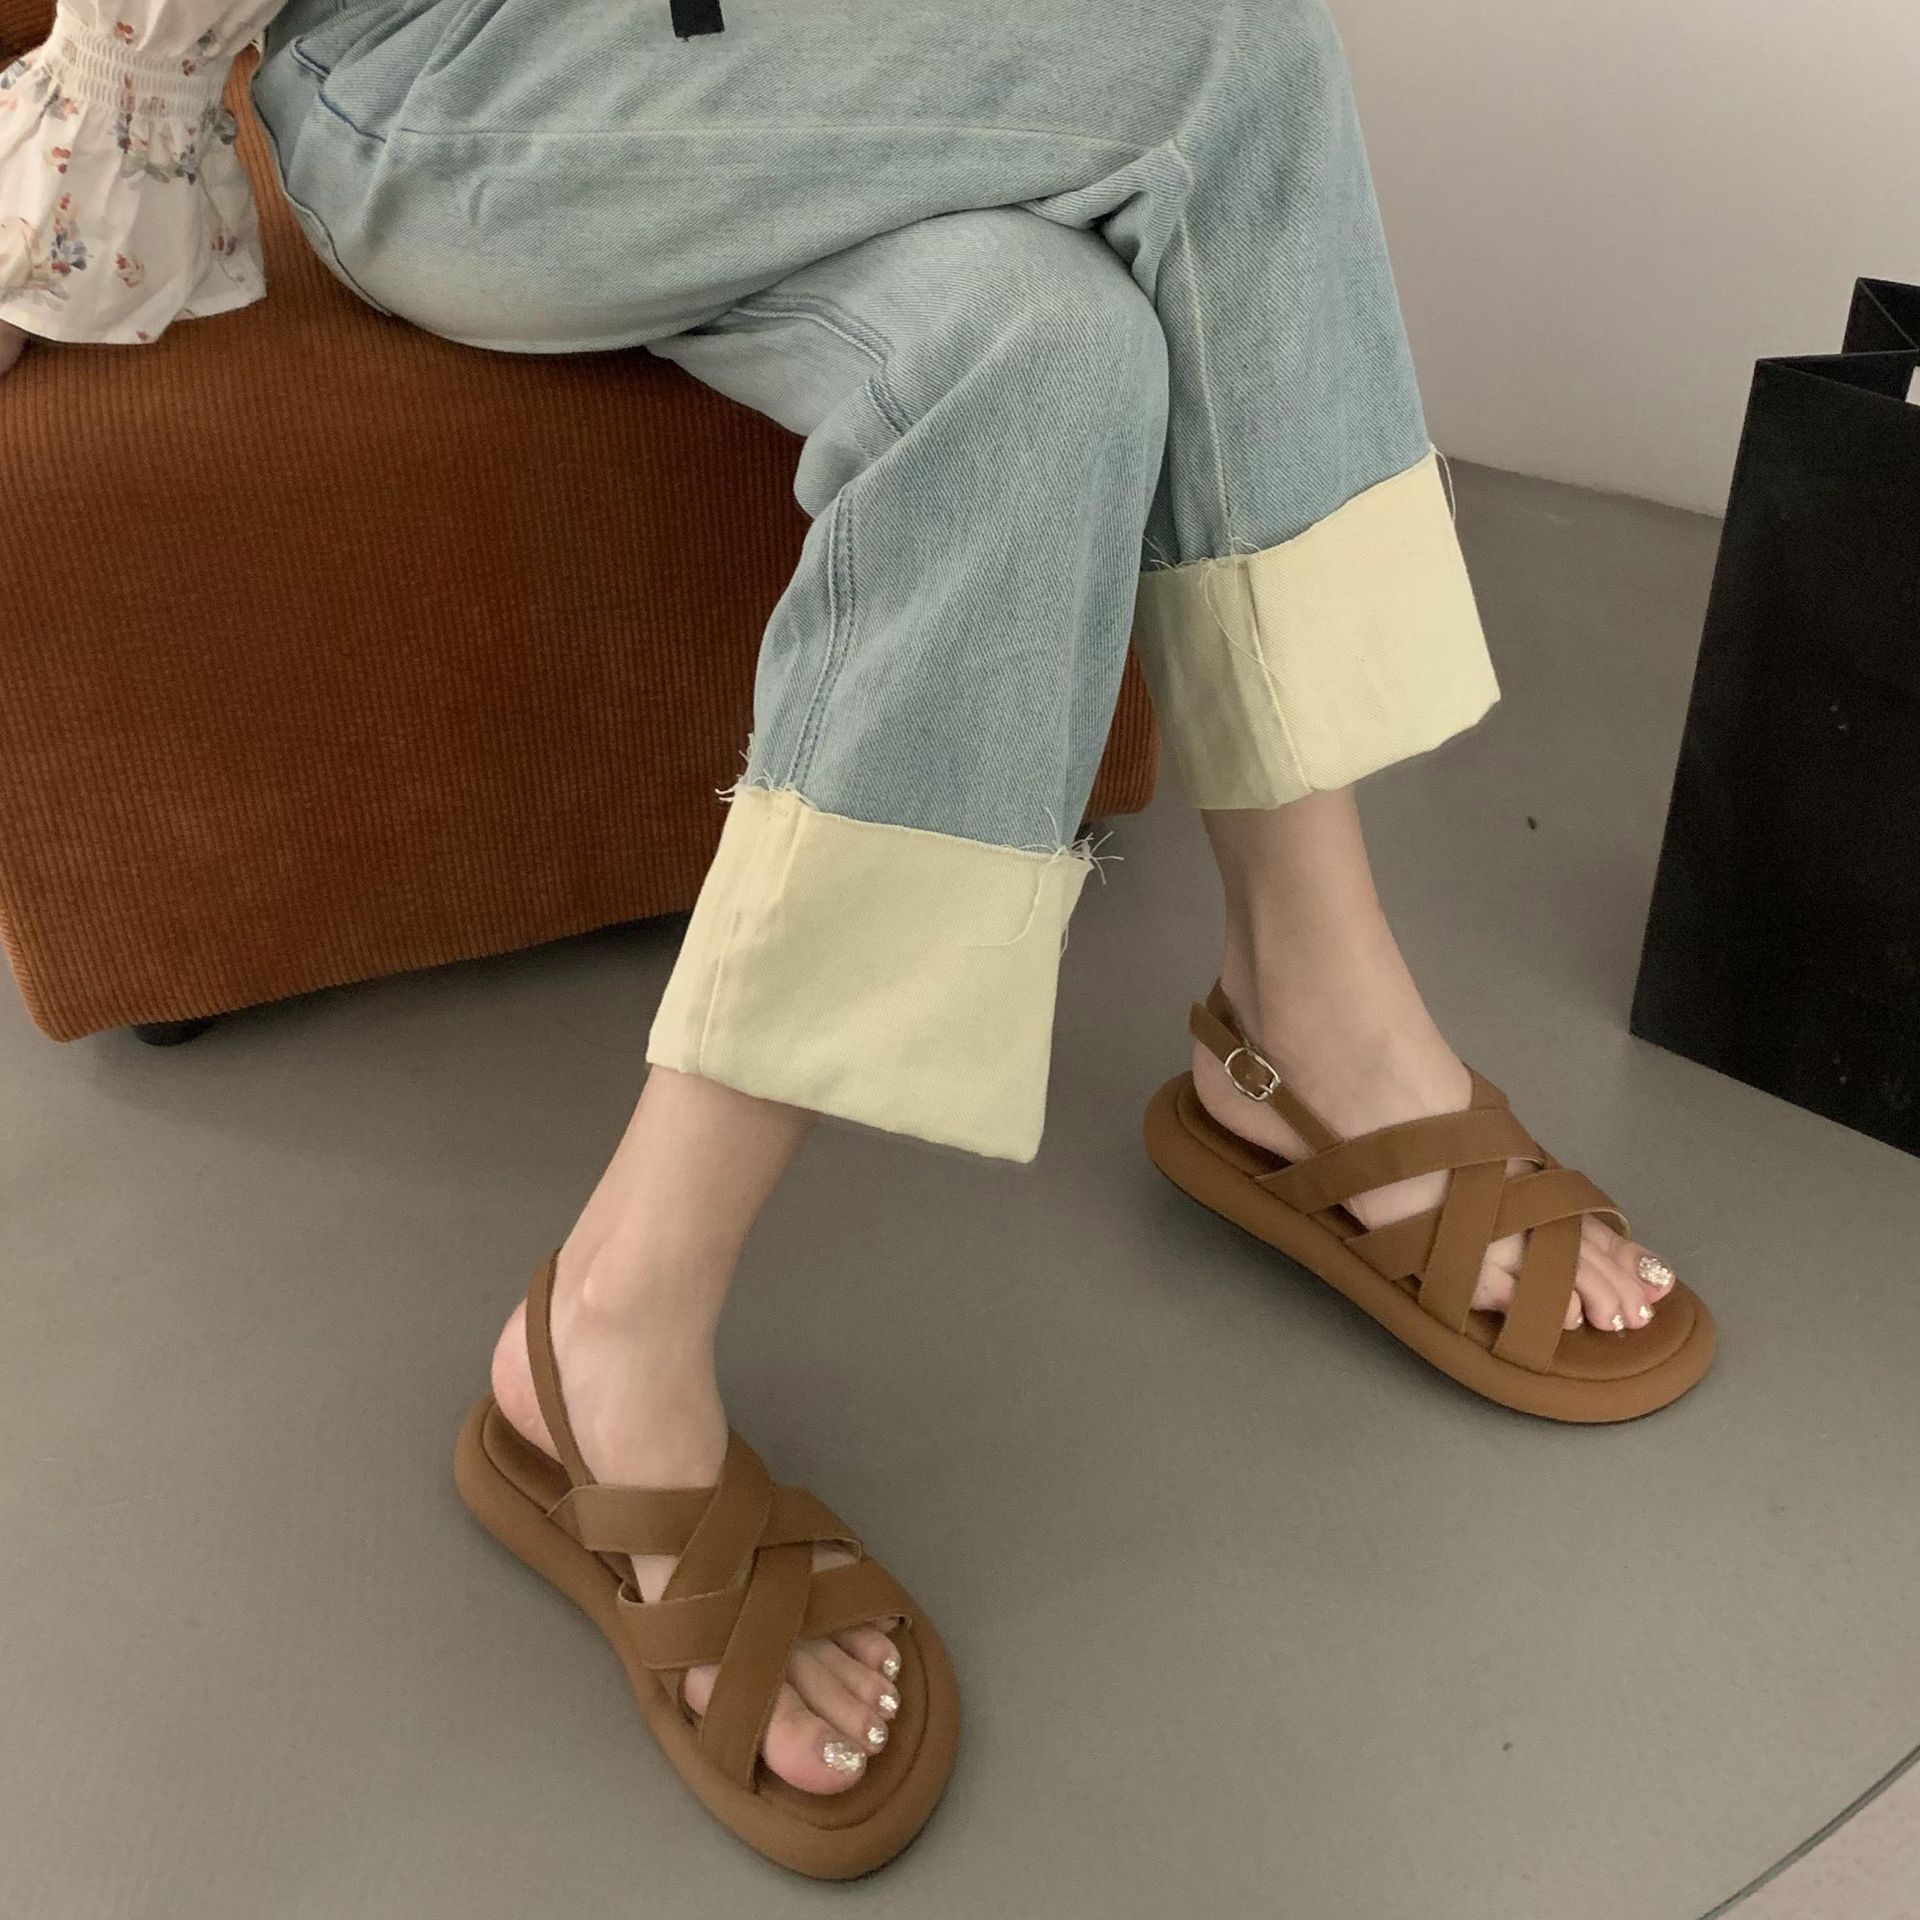 Casual and laid-back for relaxed outings Wedge Sandals Easy to style with various outfits